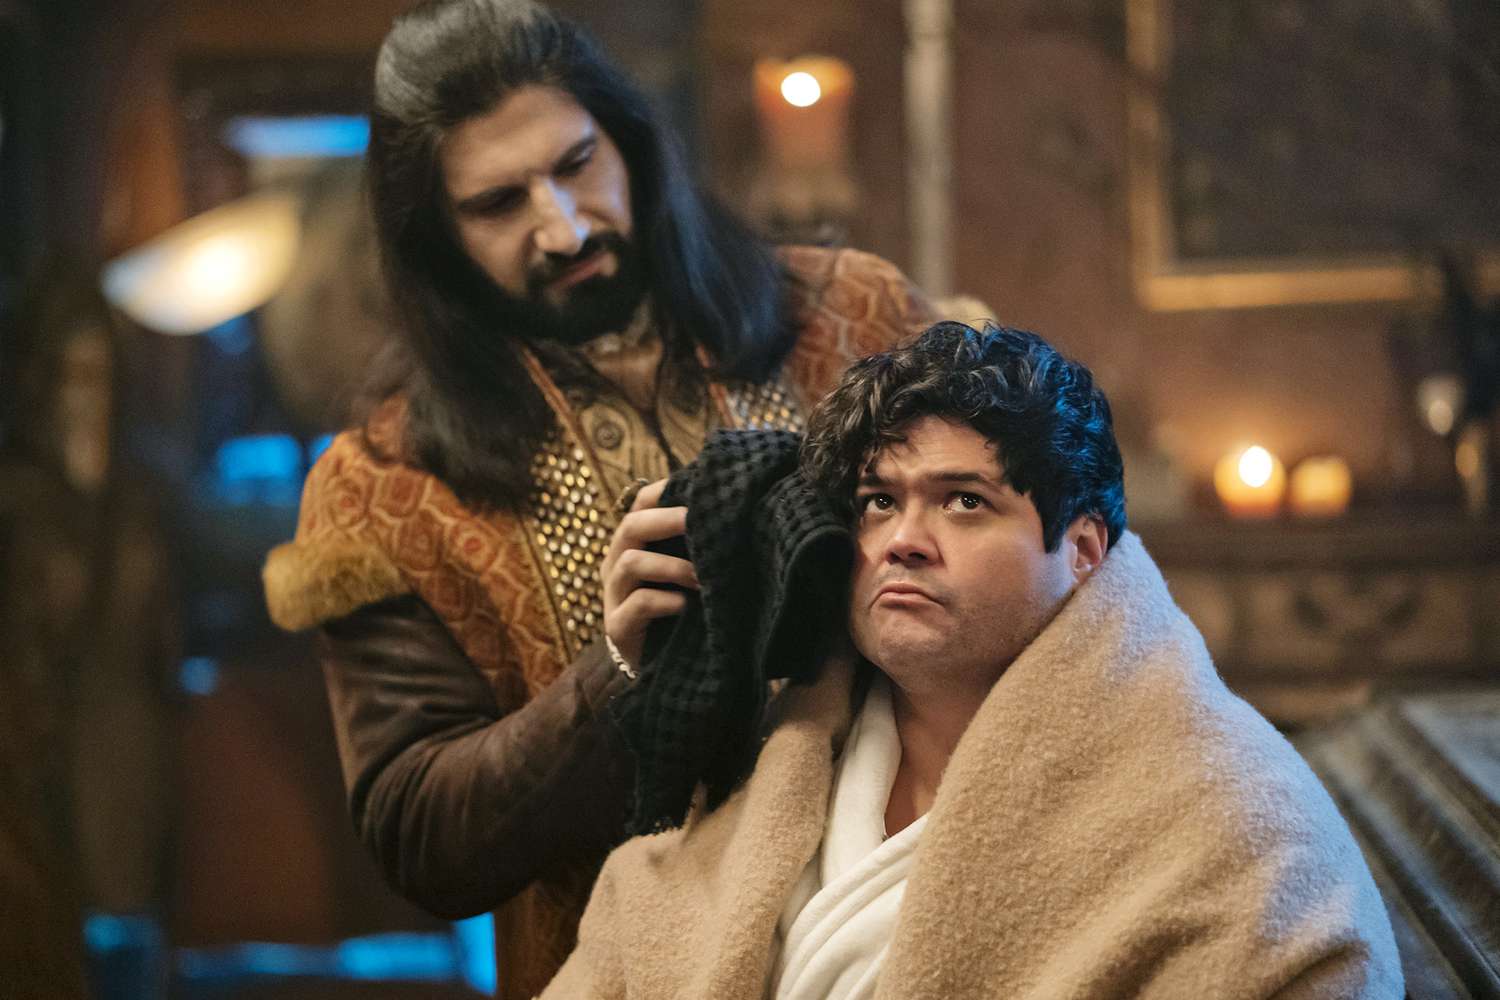 “WHAT WE DO IN THE SHADOWS” -- “Reunited” -- Season 4, Episode 1 (Airs July 12) — Pictured: Kayvan Novak as Nandor, Harvey Guillén as Guillermo. CR: Russ Martin: FX